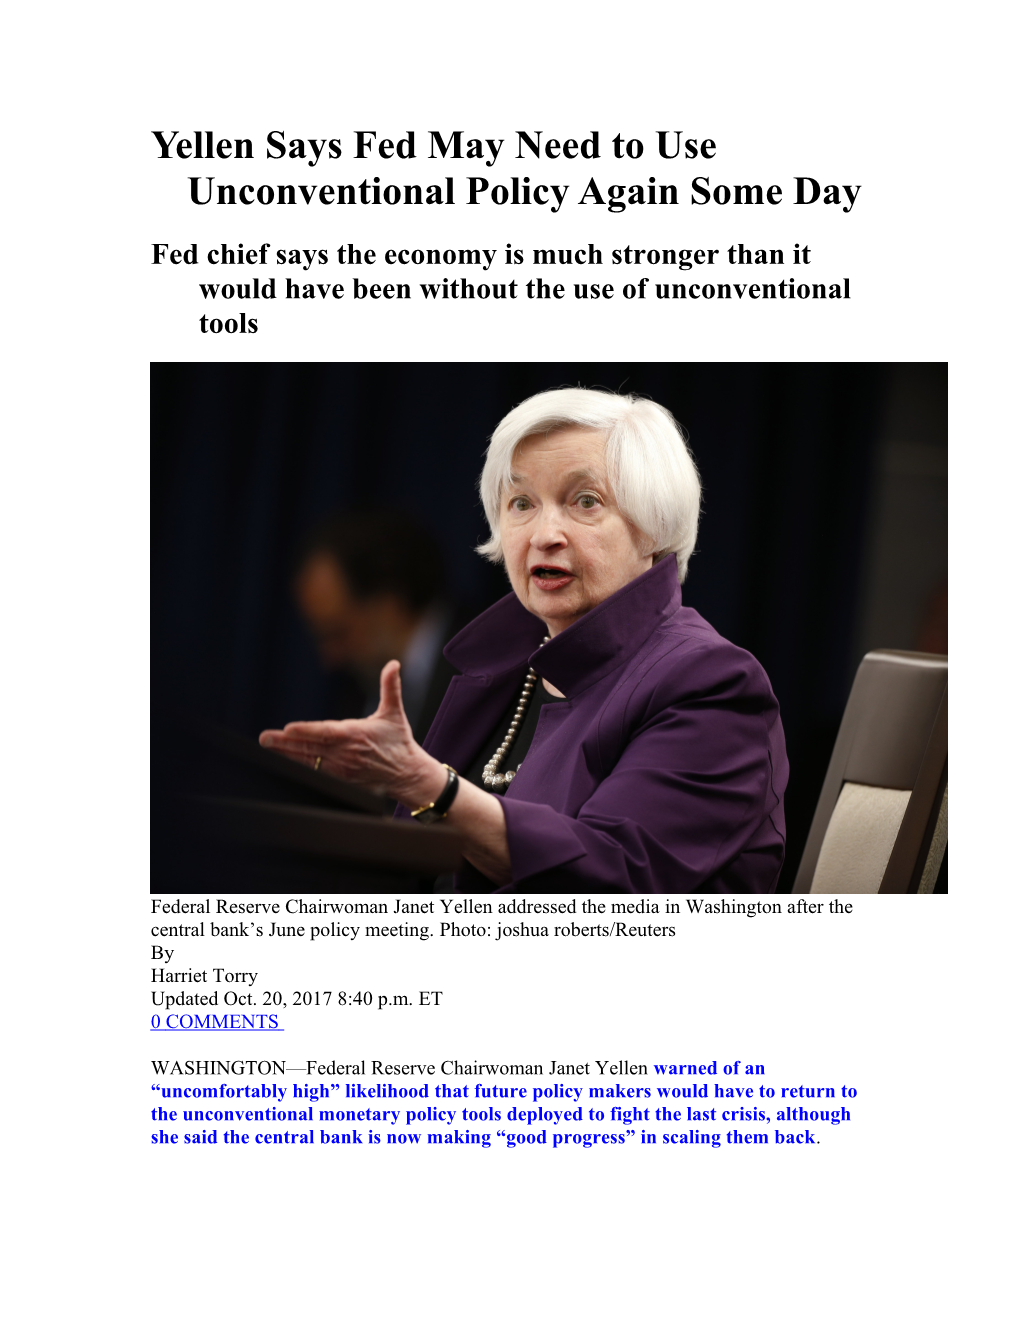 Yellen Says Fed May Need to Use Unconventional Policy Again Some Day